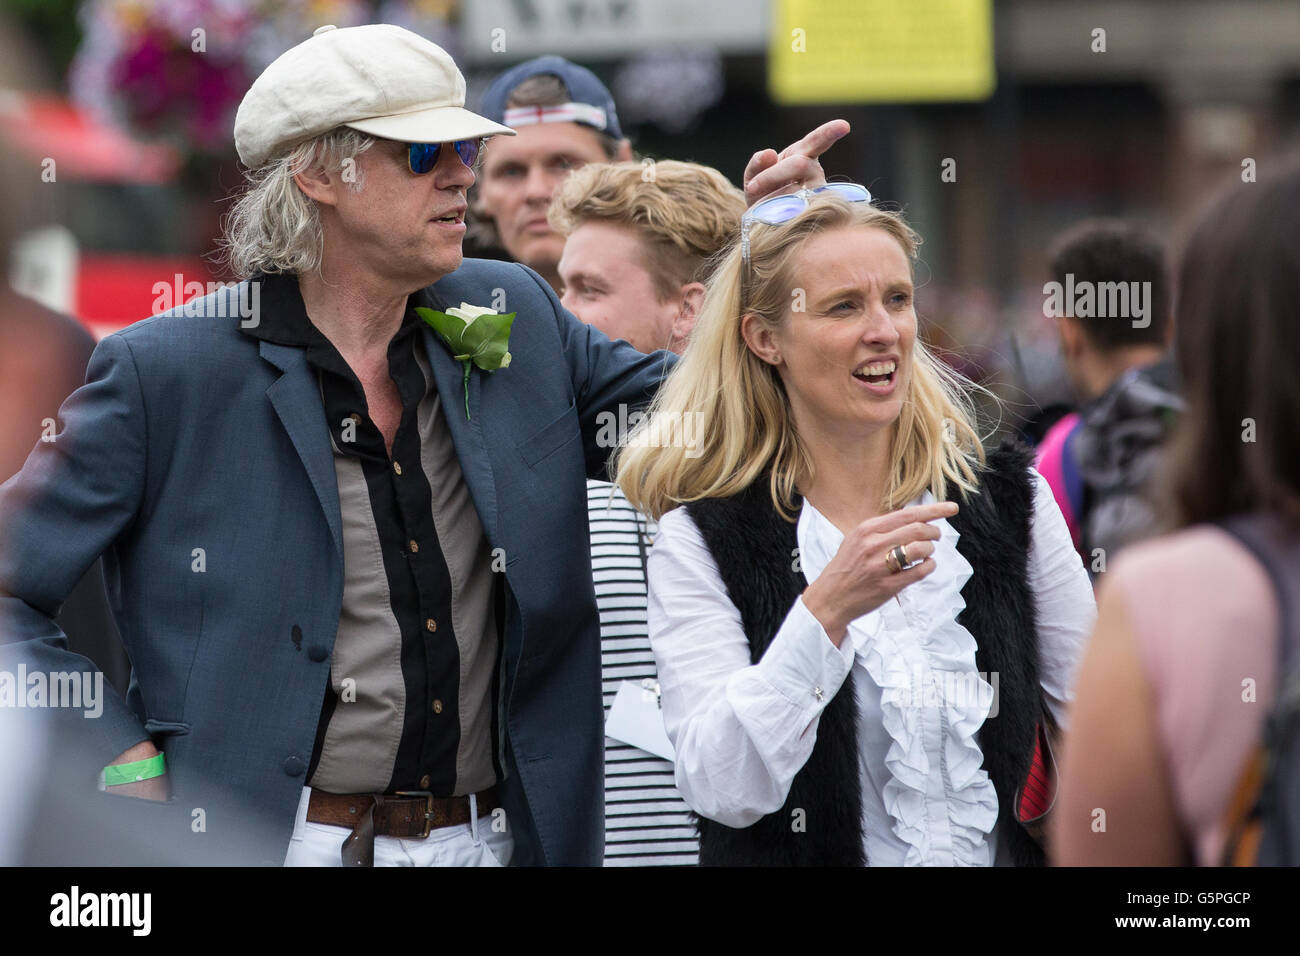 London, UK. 22nd June, 2016. Bob Geldof leaves the 'More In Common' memorial event for Jo Cox MP in Trafalgar Square, organised by her family and friends. Jo Cox was killed in her constituency on 16th June. Credit:  Mark Kerrison/Alamy Live News Stock Photo